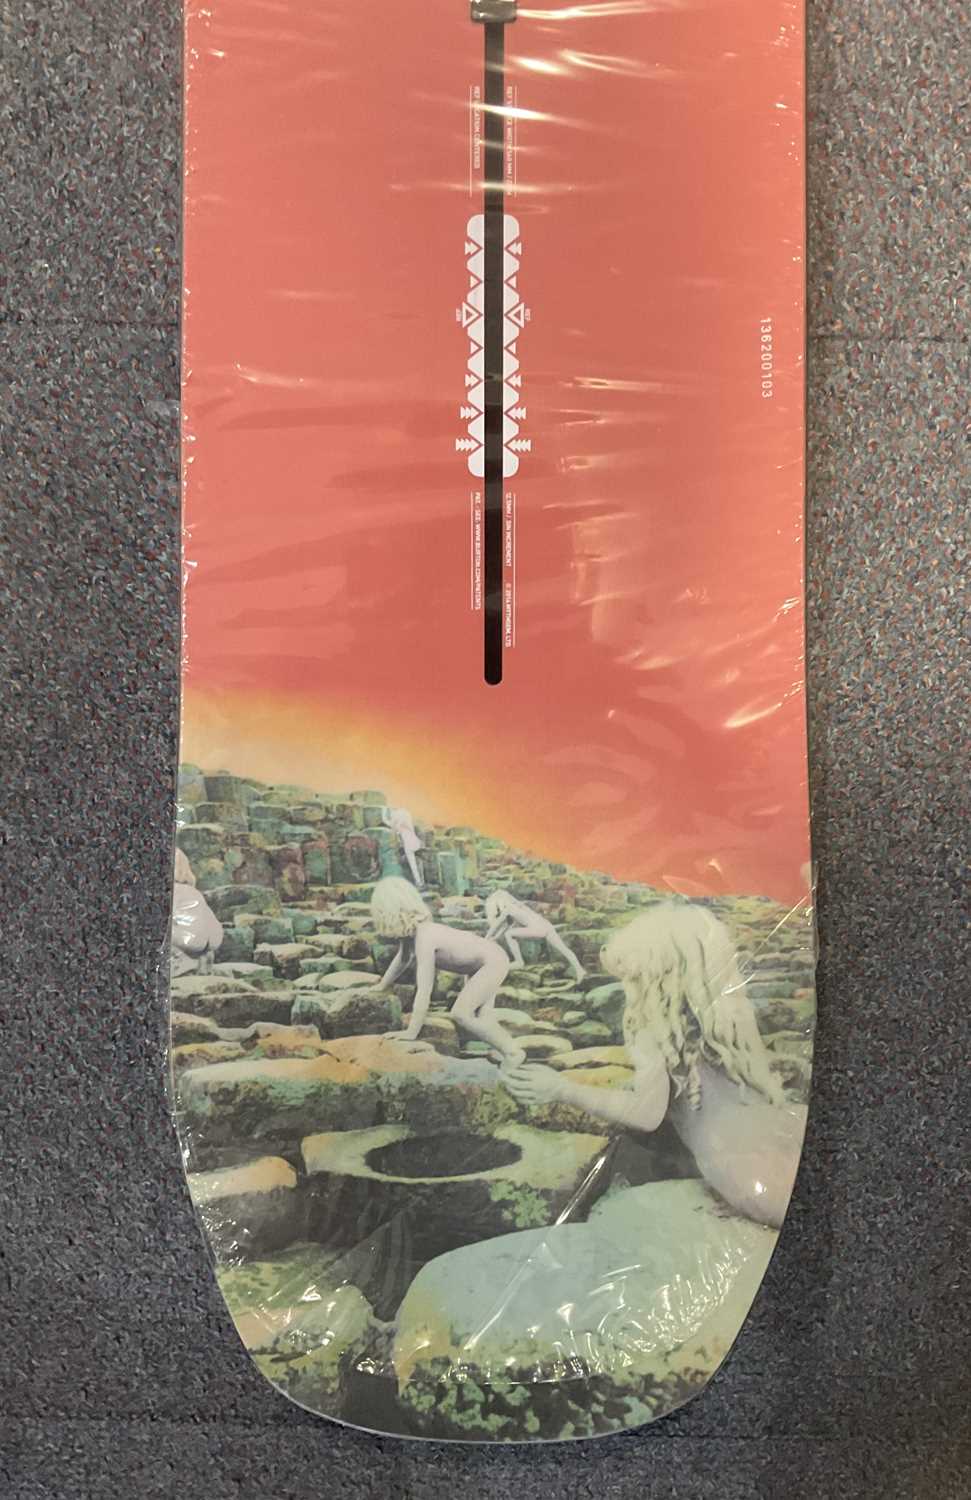 A 2017 Burton Easy Livin LED ZEPPELIN design snowboard, full size, still in original wrapping. The - Image 3 of 5